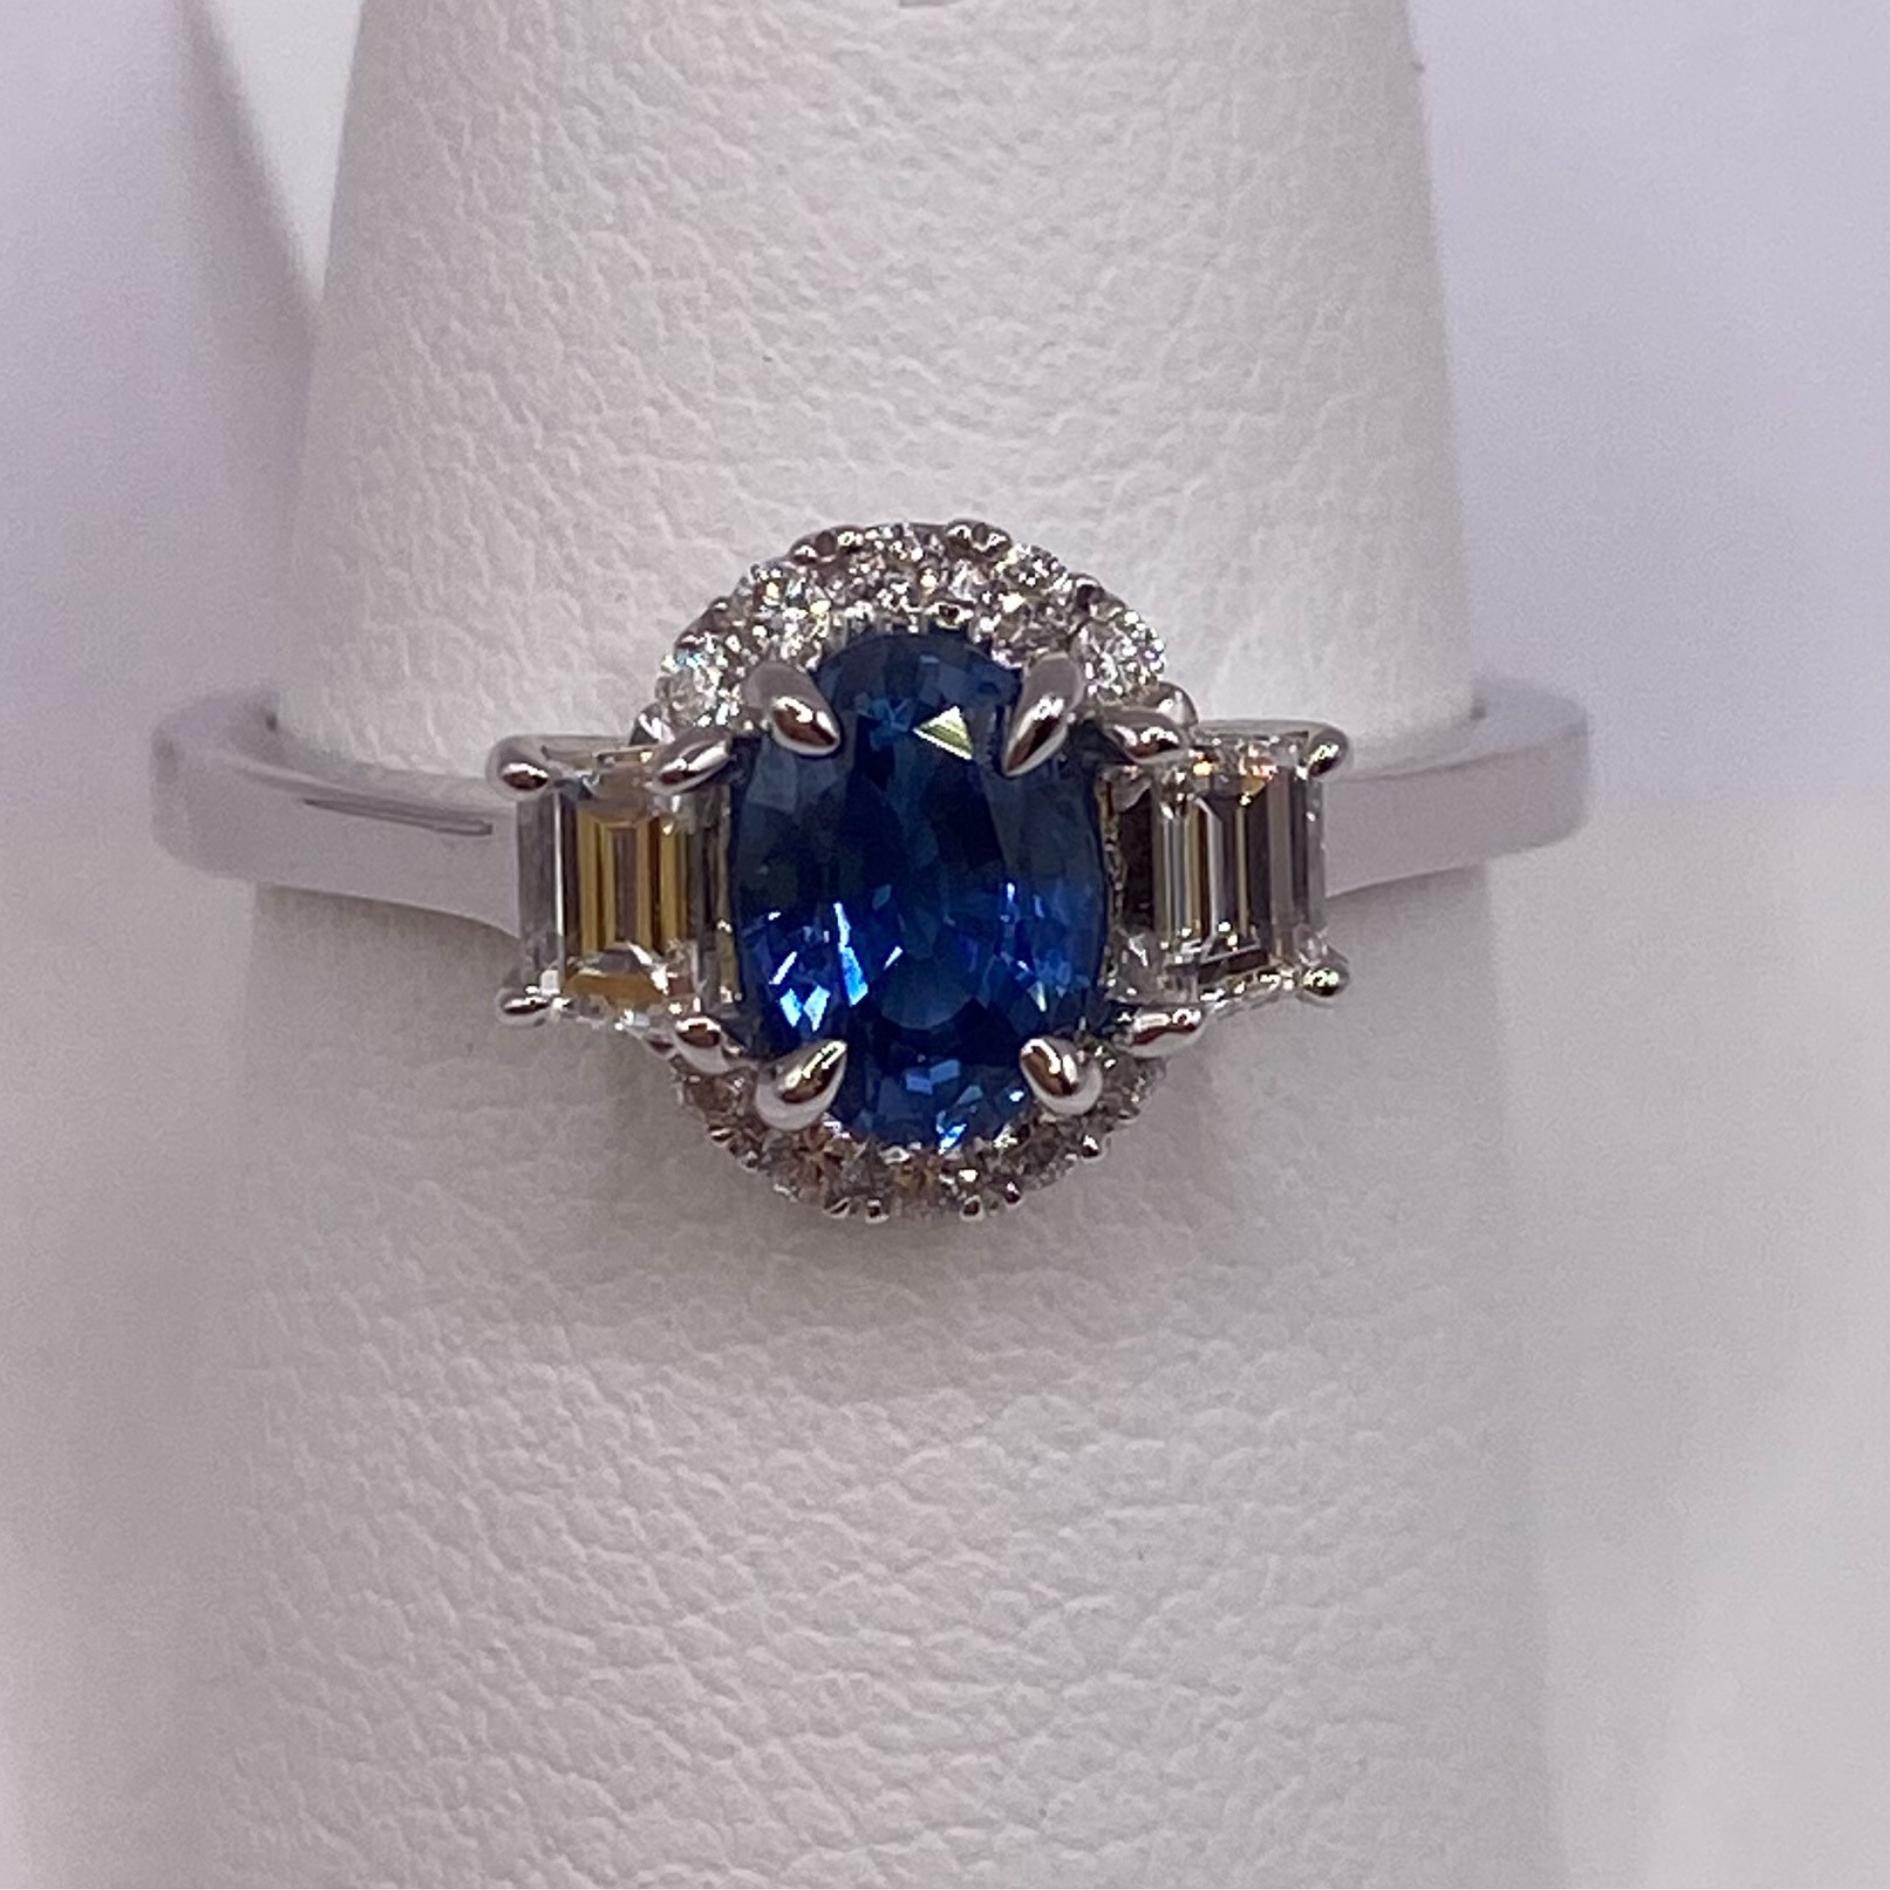 18KT White Gold
Ring Size: 6.50
Band: 1.6mm Wide
(ring is size 6.5 but is sizable upon request)

Number of Oval Sapphires: 1
Carat Weight: 0.68ct
Stone Size: 6.5 x 4.5mm
Color: Cornflower Blue

Number of Trapezoid Diamonds: 2
Carat Weight: